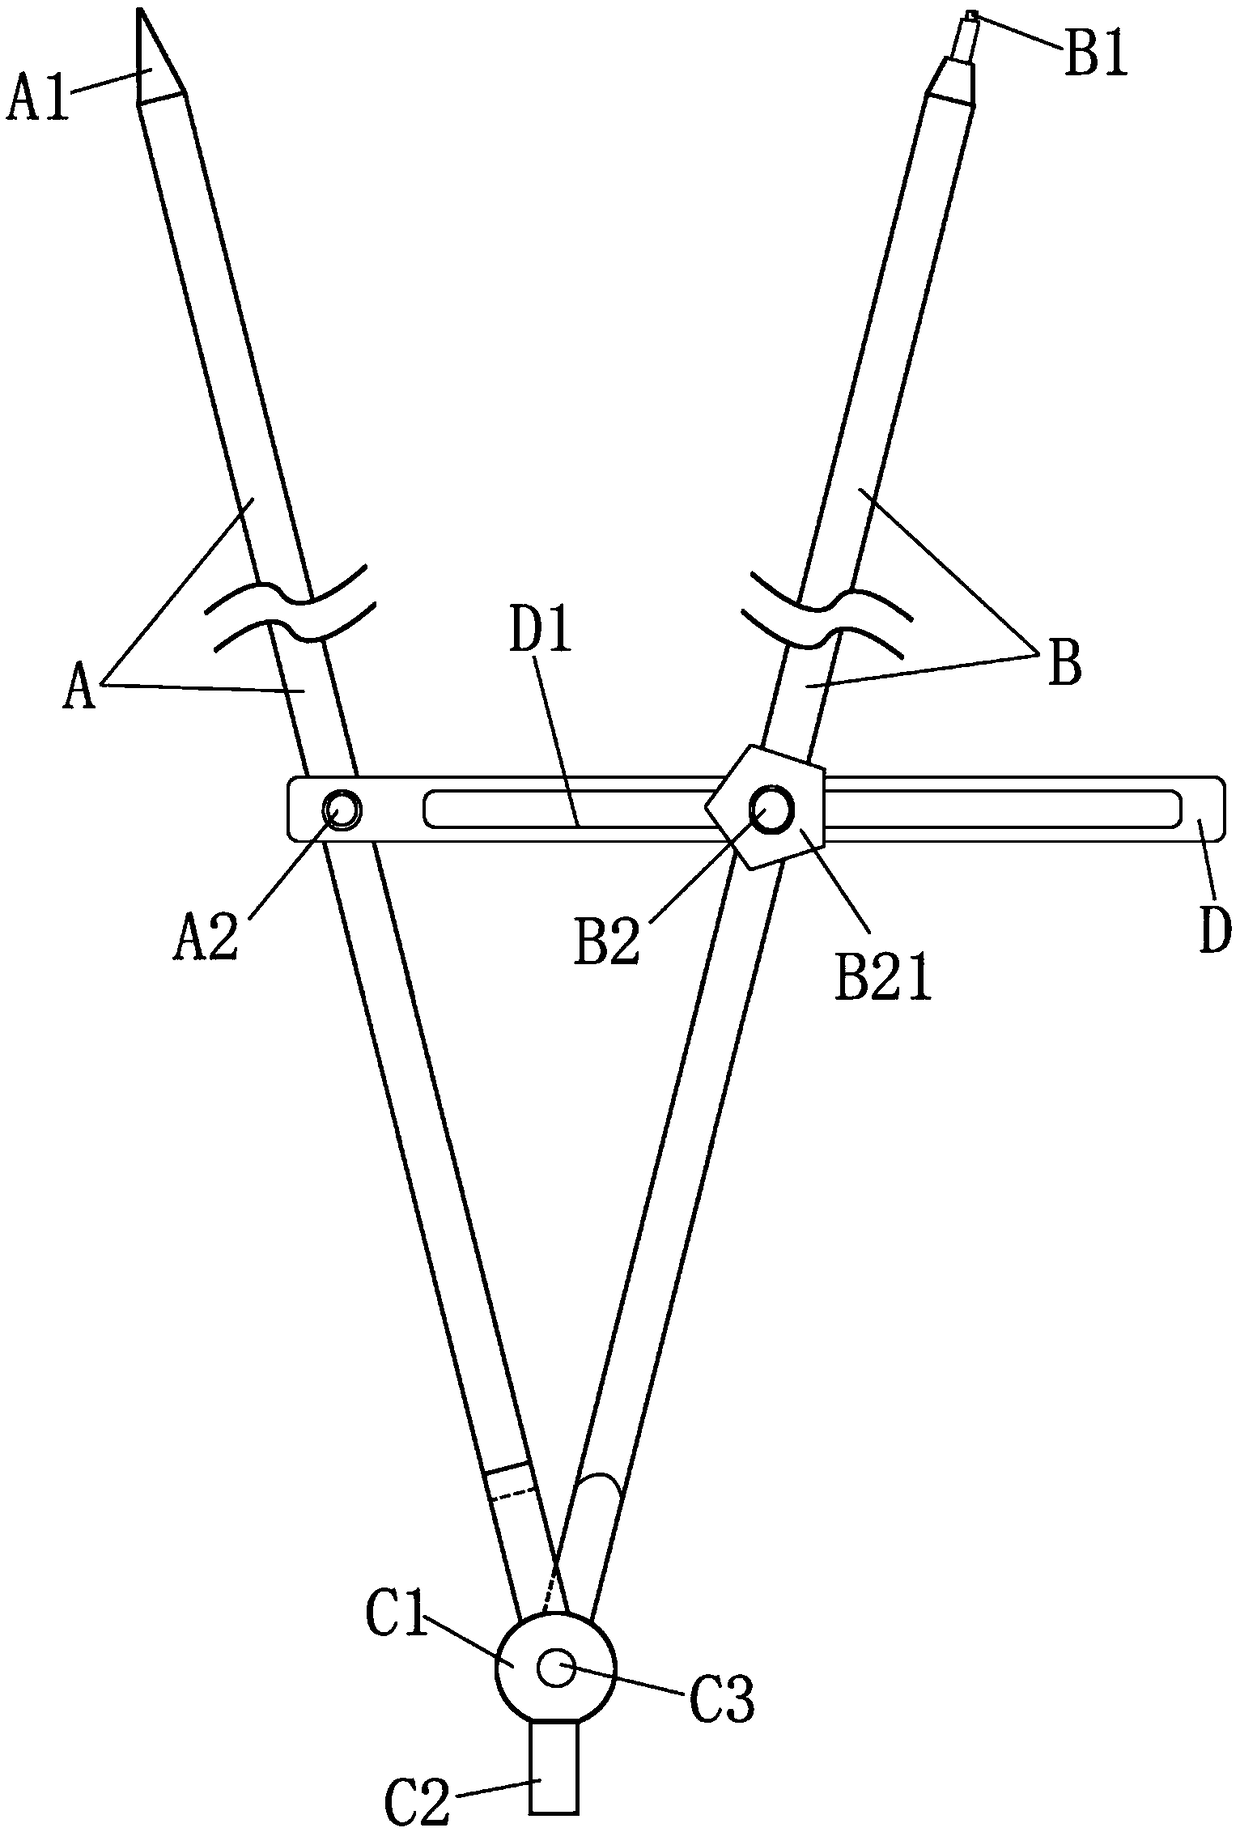 Compass type control frame for marking ceiling rod guiding hole positions